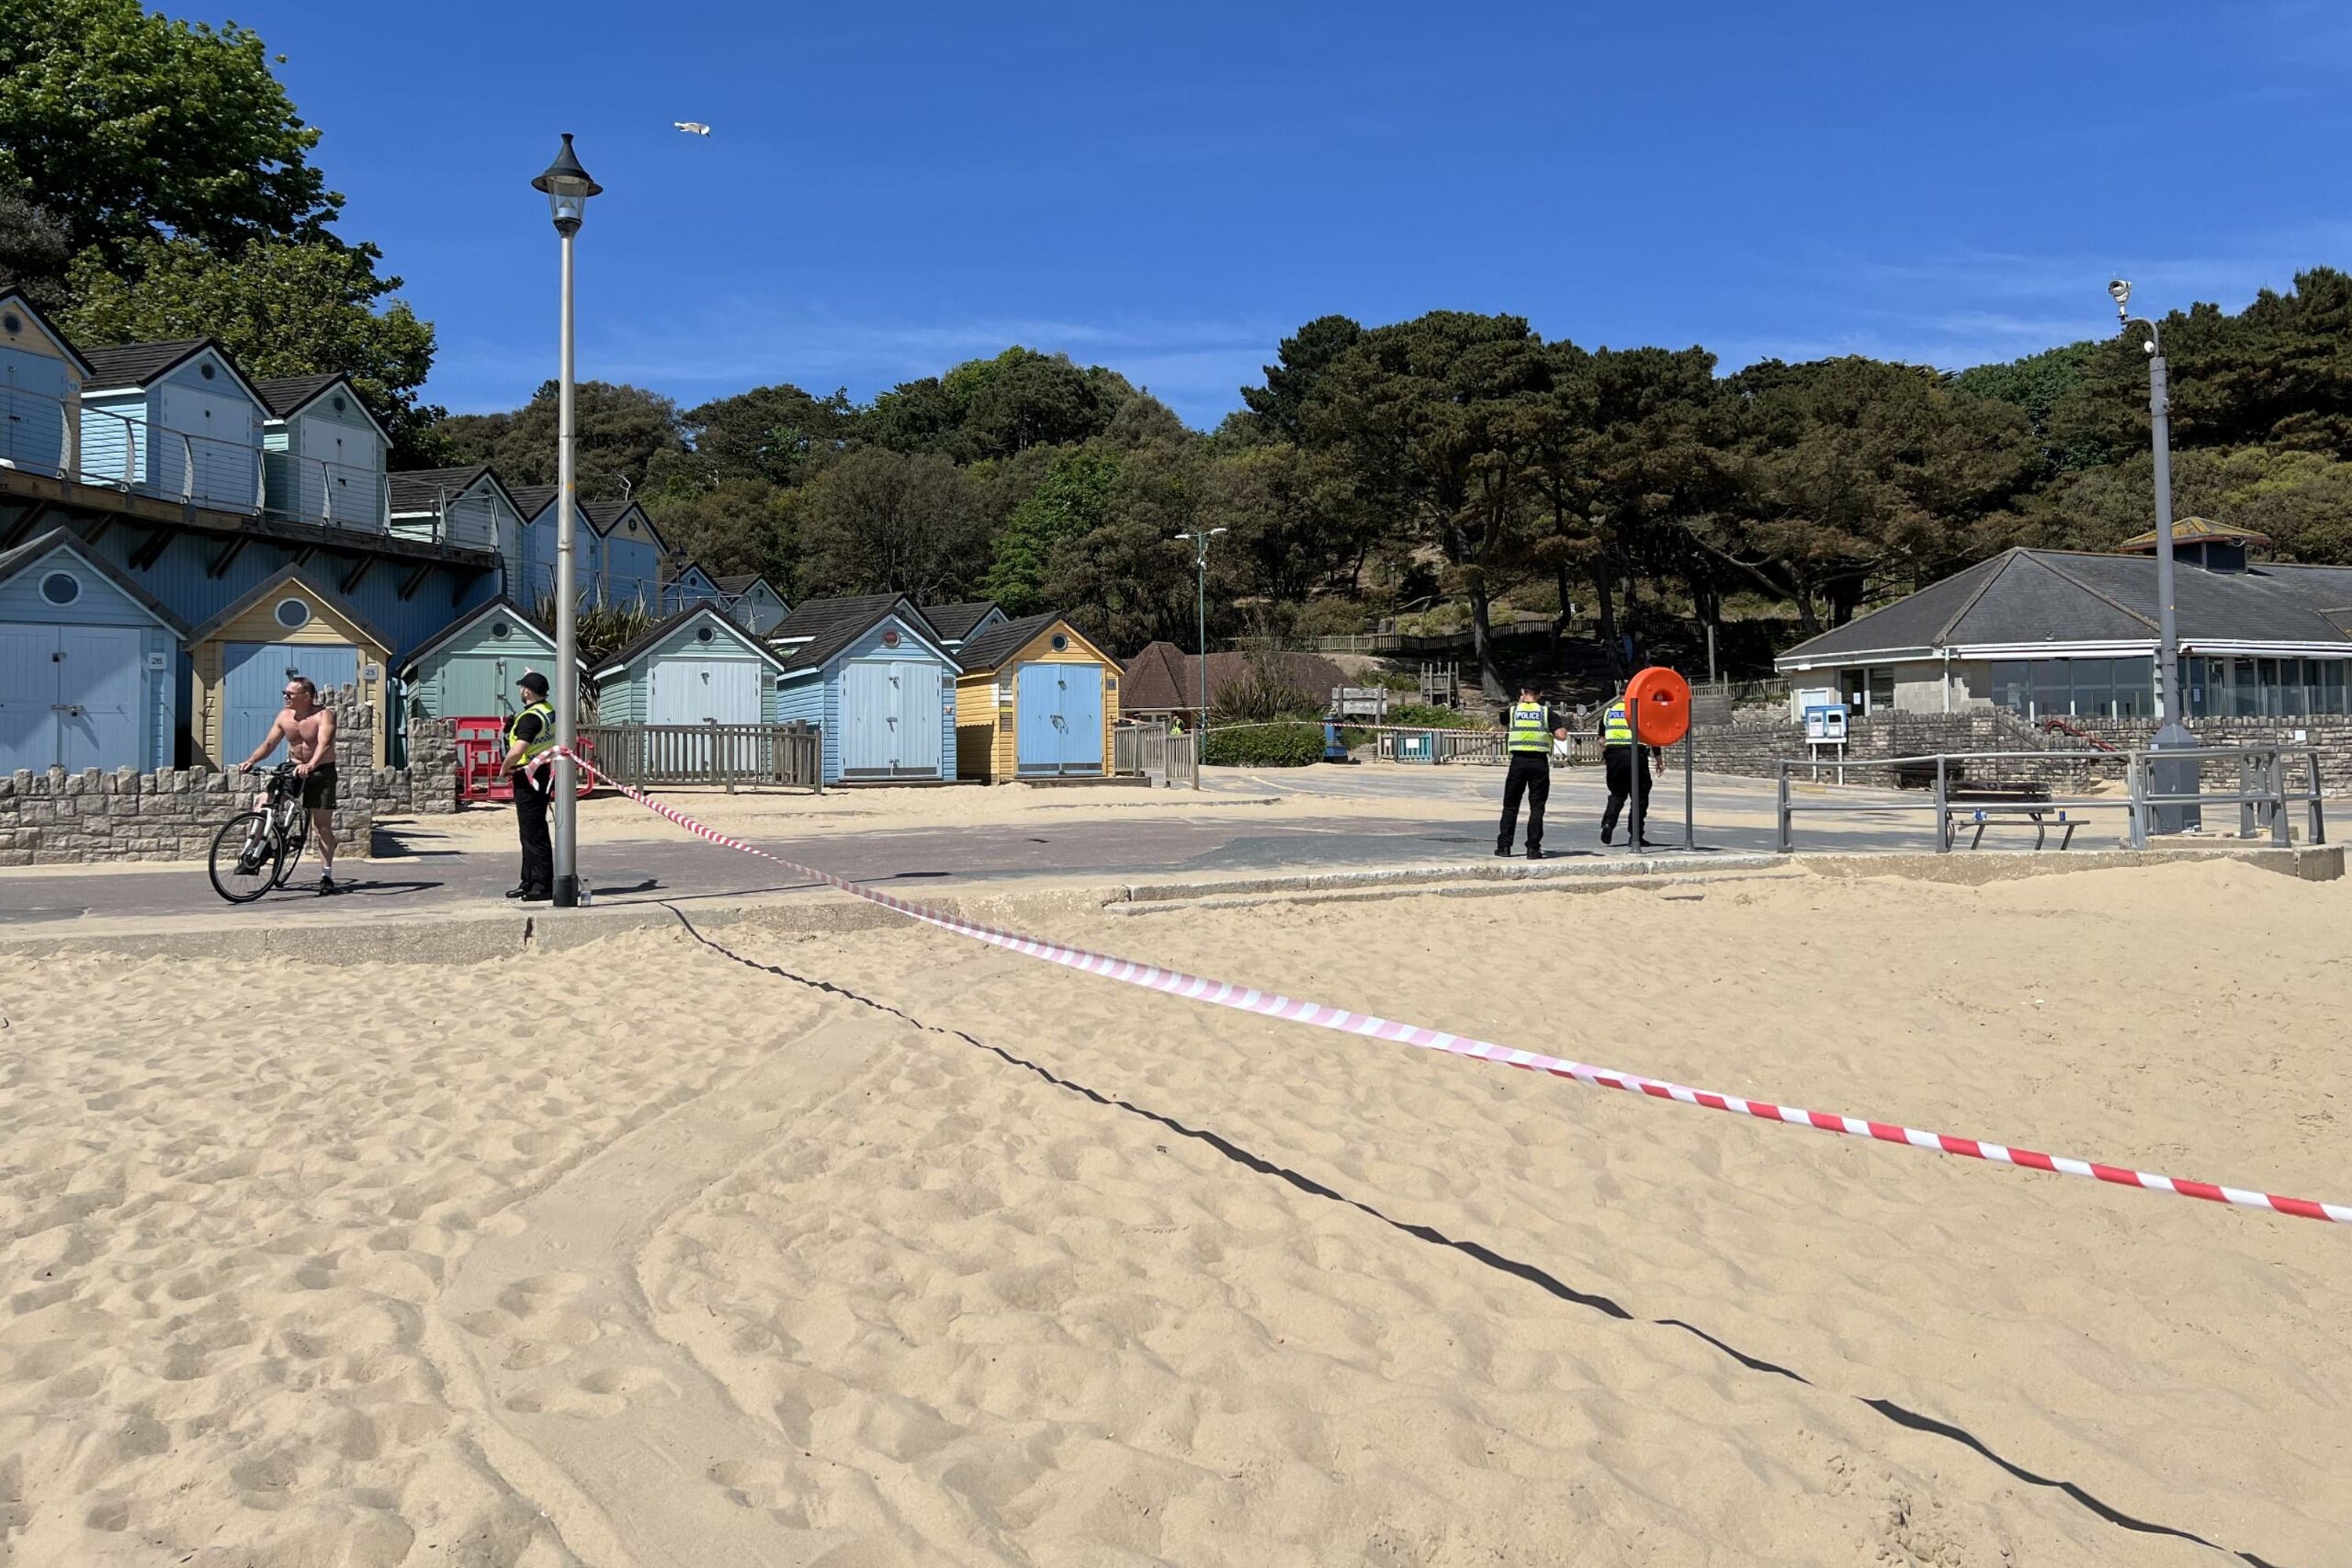 Police officers at the scene of a fatal stabbing at Durley Chine Beach in Bournemouth